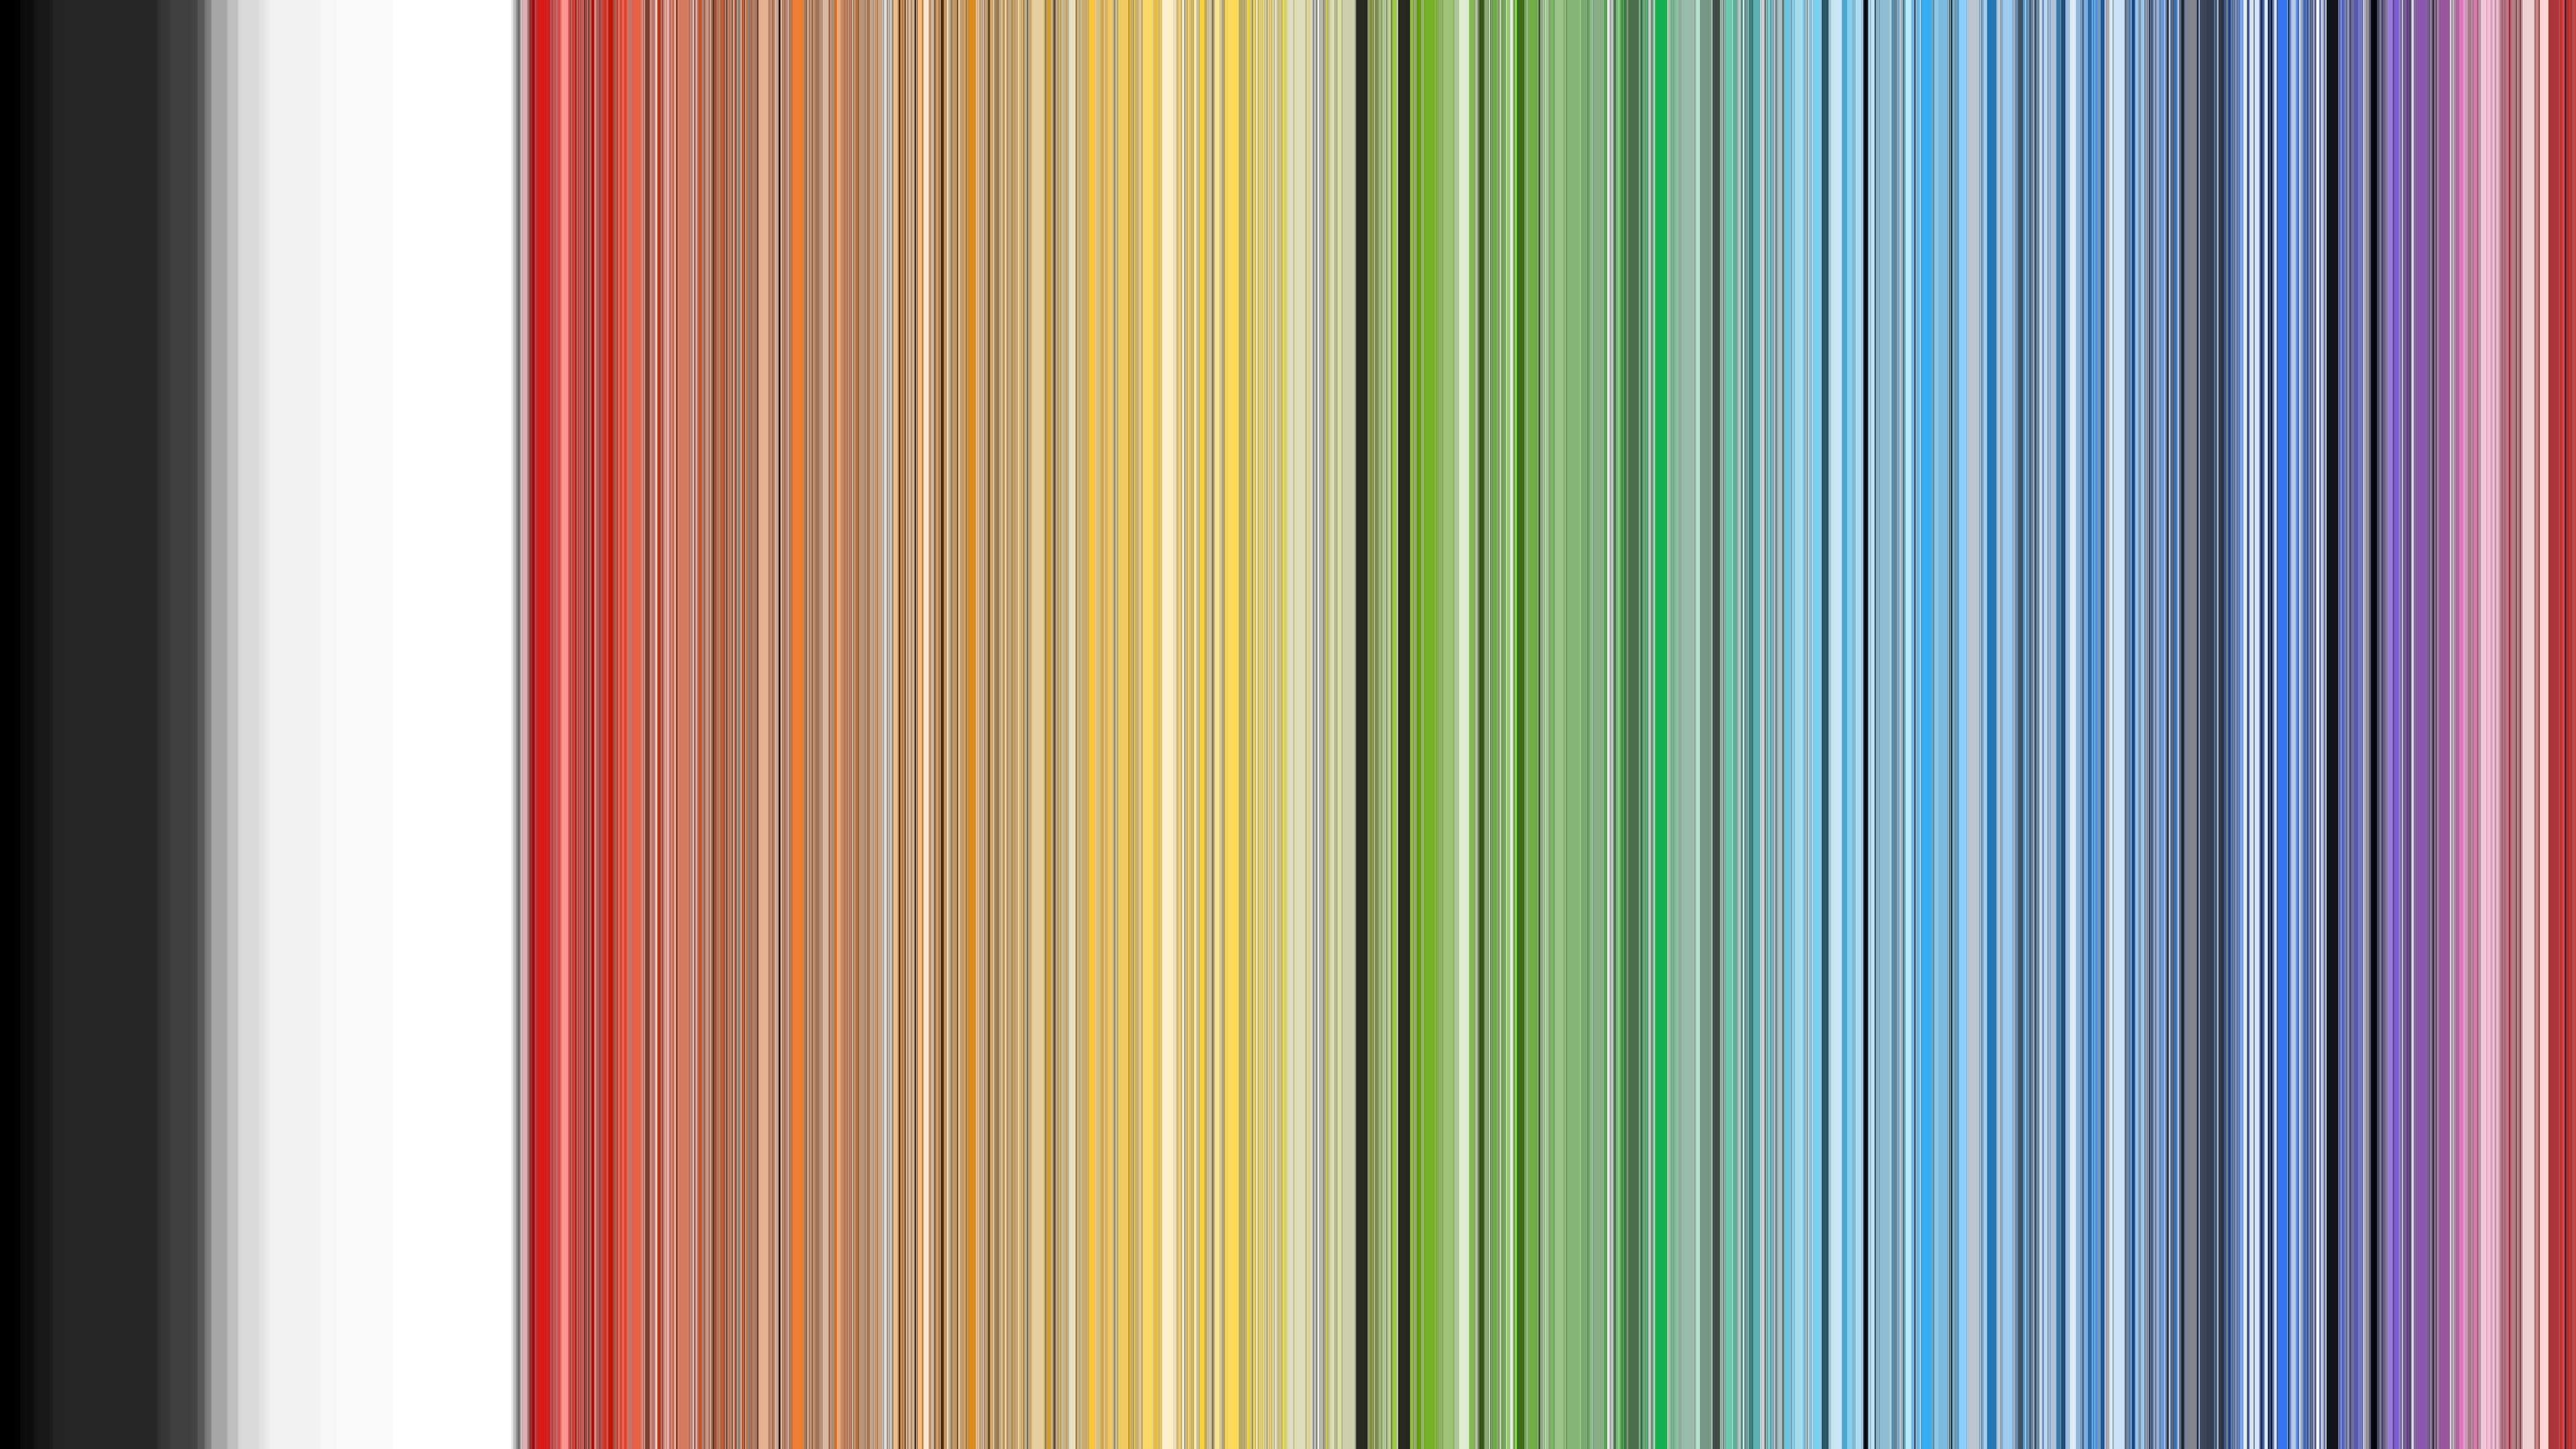 A gazillion horizontally stacked bars, sorted by colour. Also looks
like a rainbow.